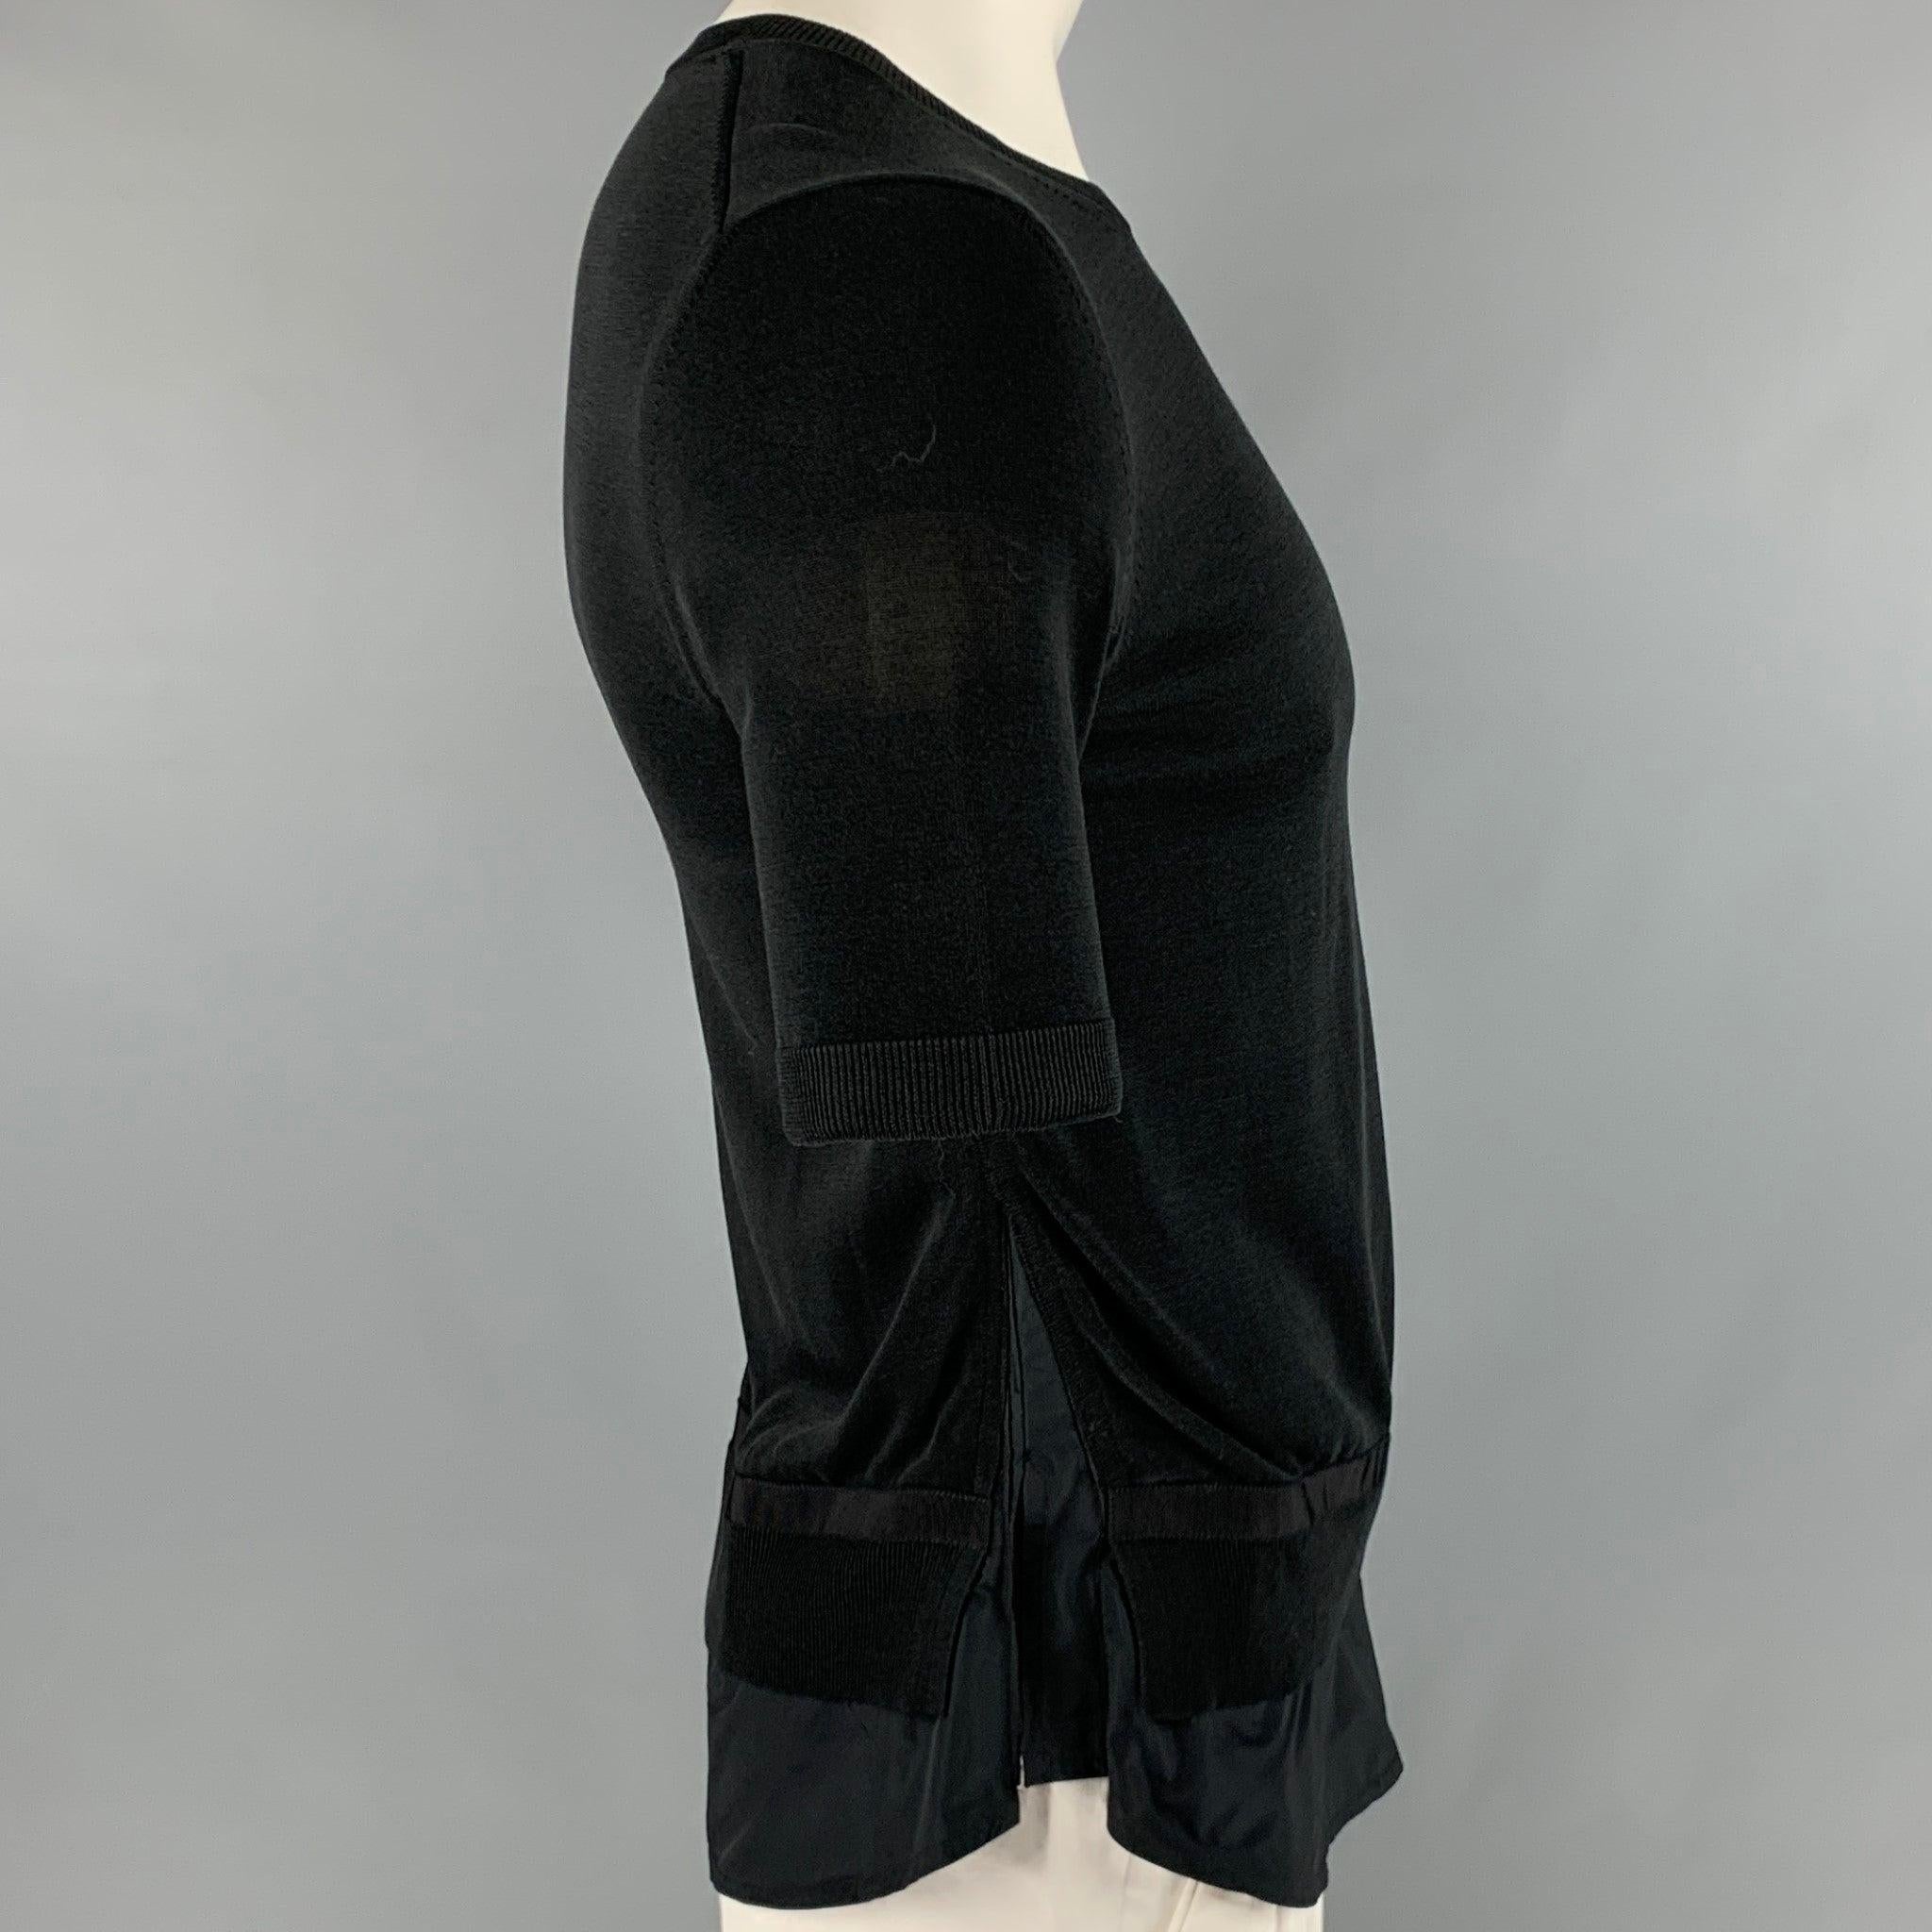 MONCLER pullover
in a
black viscose cotton blend featuring shirt tail detail, stretchy fit, and a scoop neck.Very Good Pre-Owned Condition. Busted stitch on left side of shirt tail. 

Marked:   XL 

Measurements: 
 
Shoulder: 18 inches Chest: 36